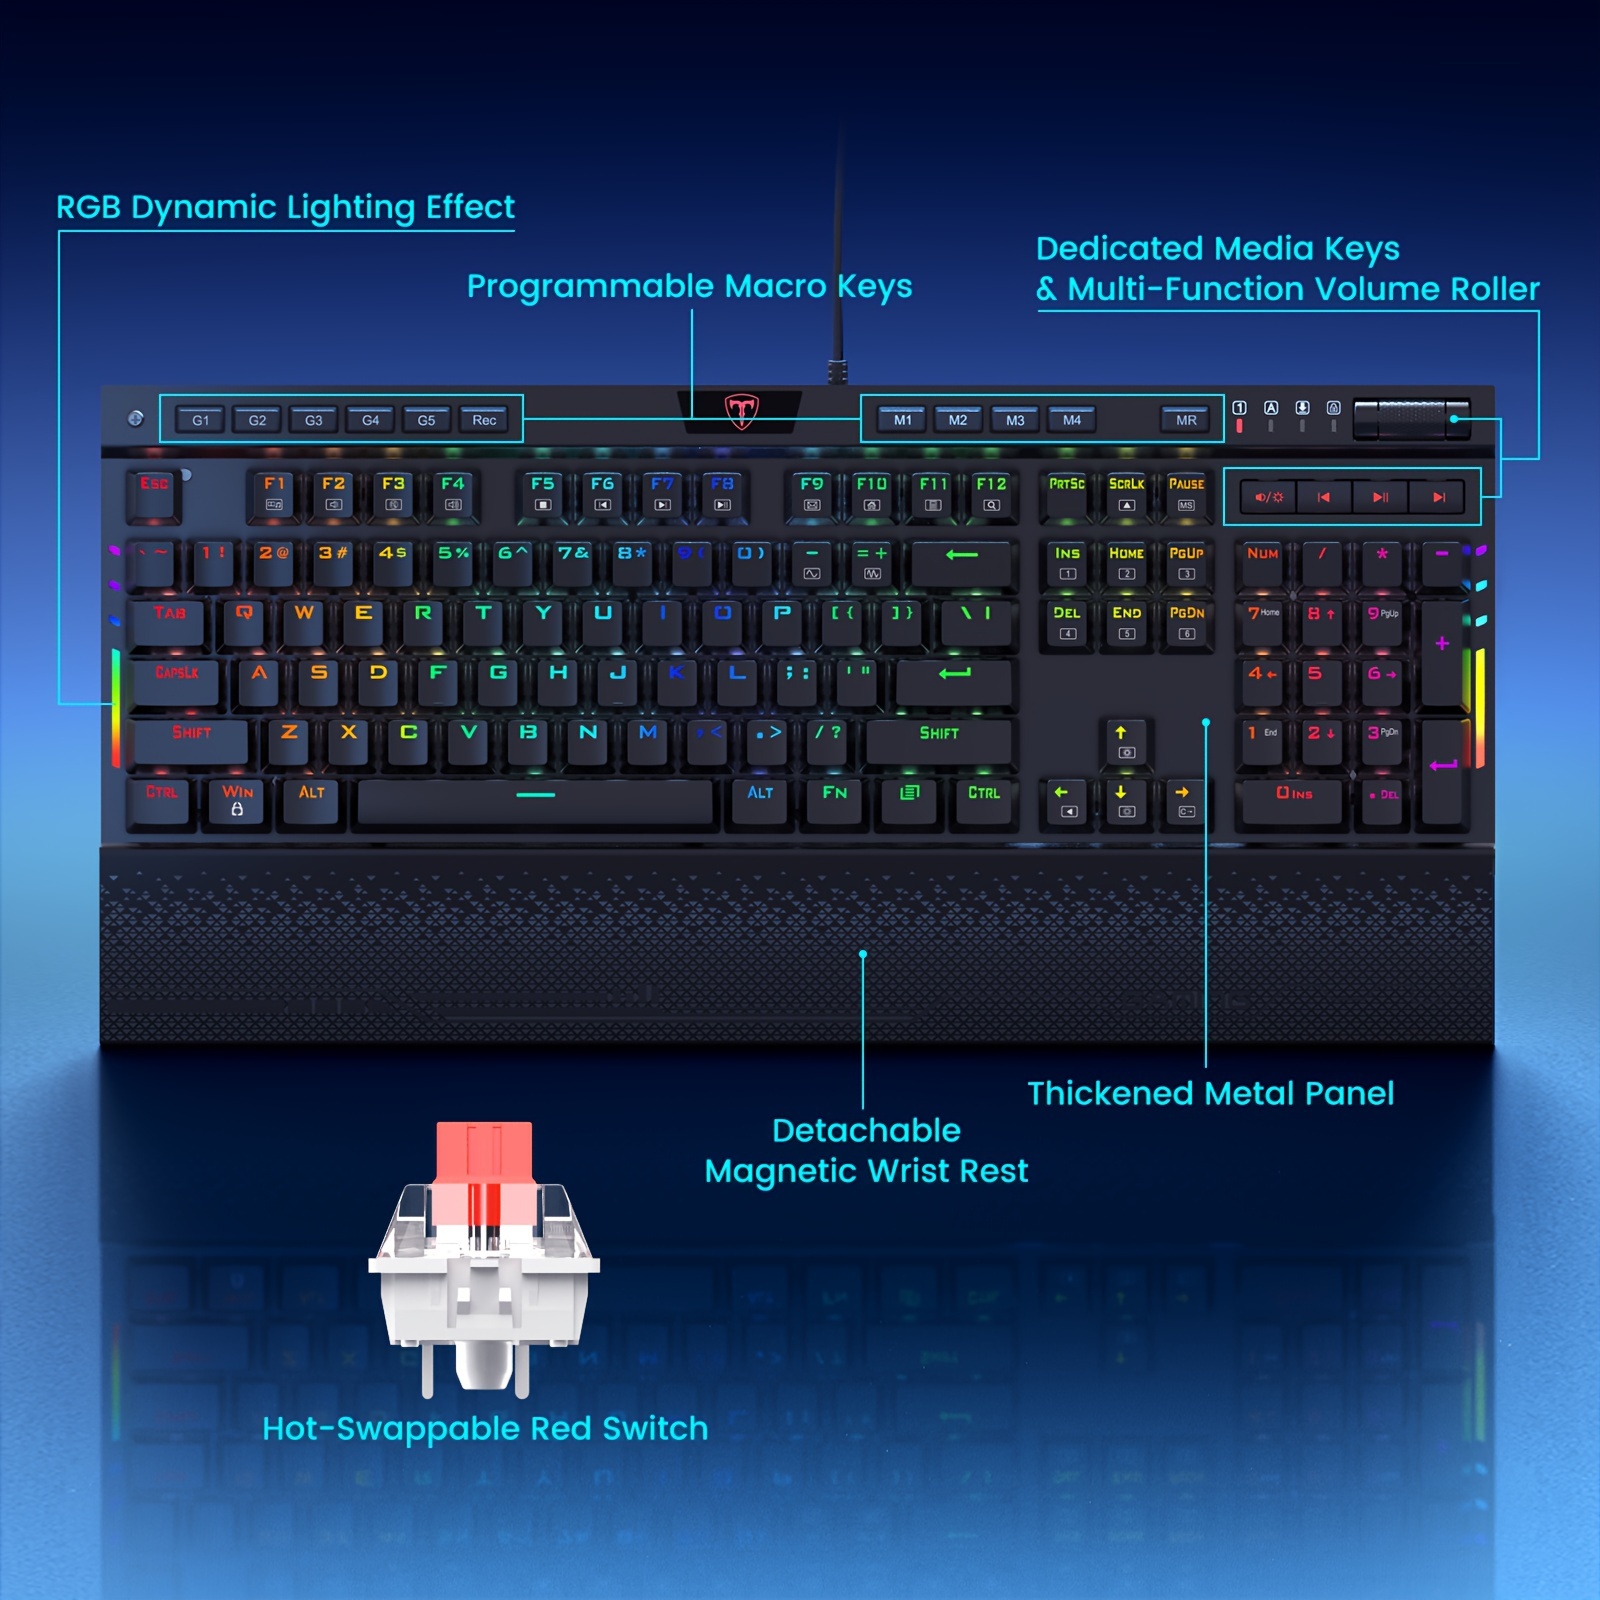 

Pro Rgb Mechanical Gaming Keyboard, Per-key Rgb Illumination, Macro Keys & Dedicated Media Controls, Detachable Wrist Rest, Aluminum Frame, Hot Swappable Linear Red Switches Wired Keyboard